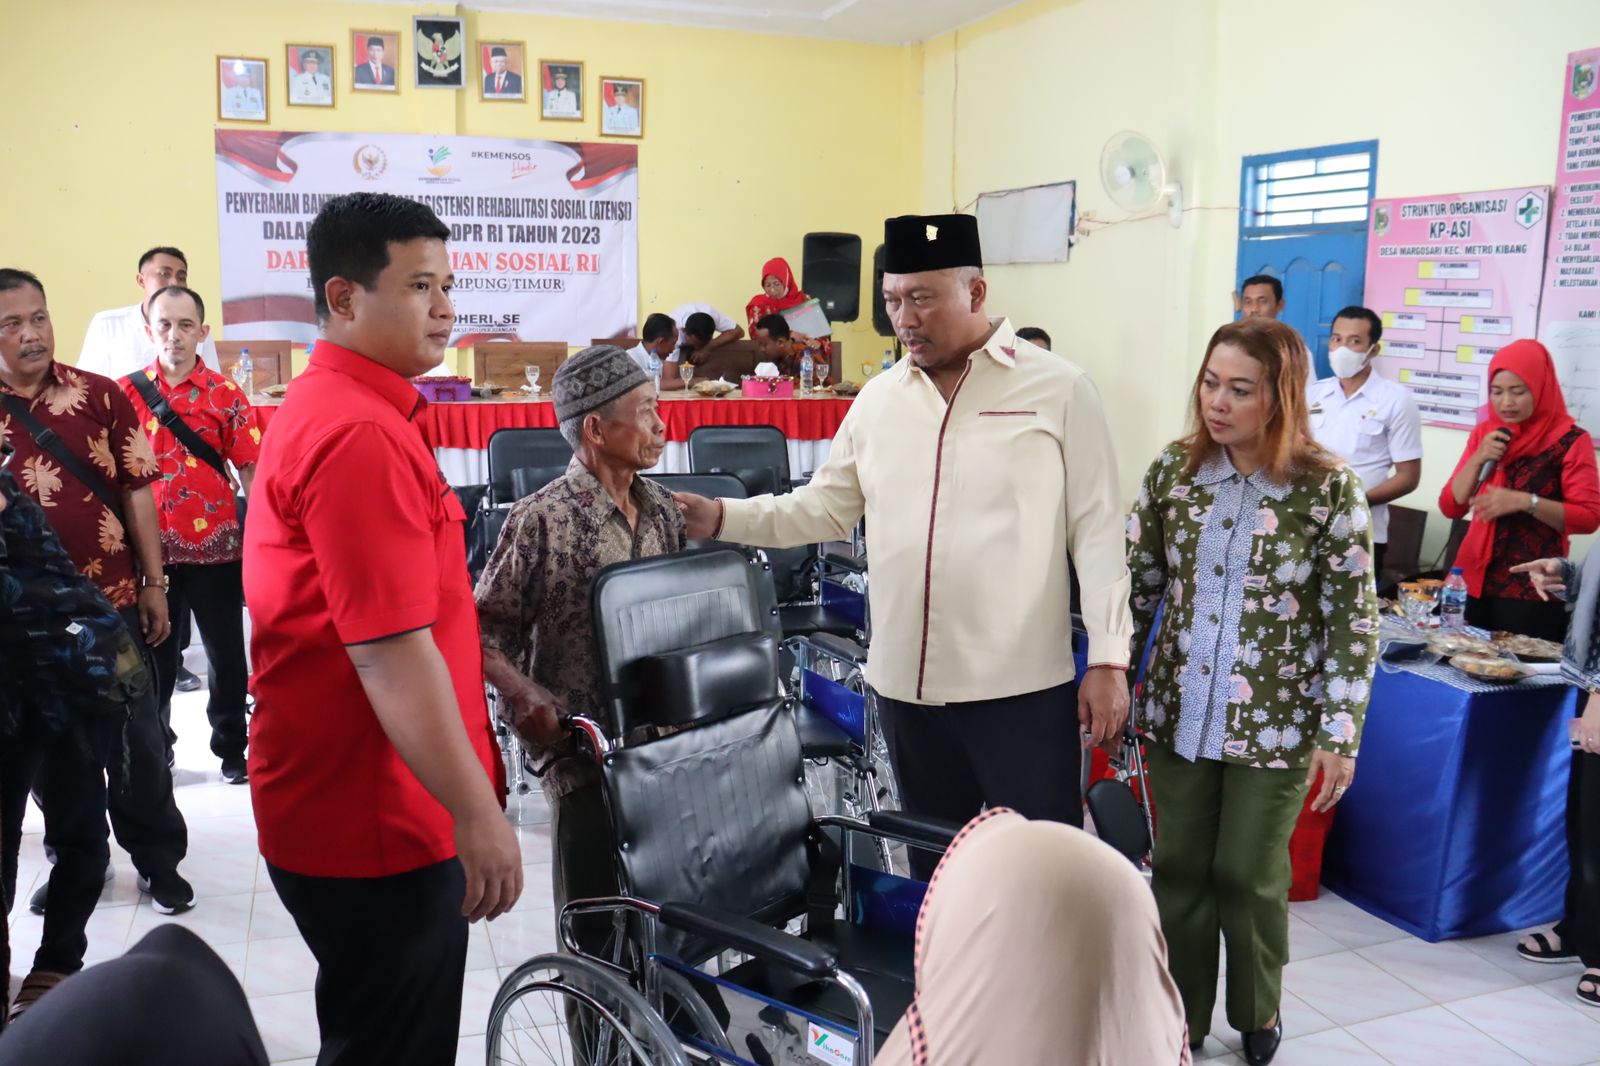 Ministry of Social Affairs and Commission VIII DPR RI Distribute ATENSI in 3 Regencies of Lampung Province